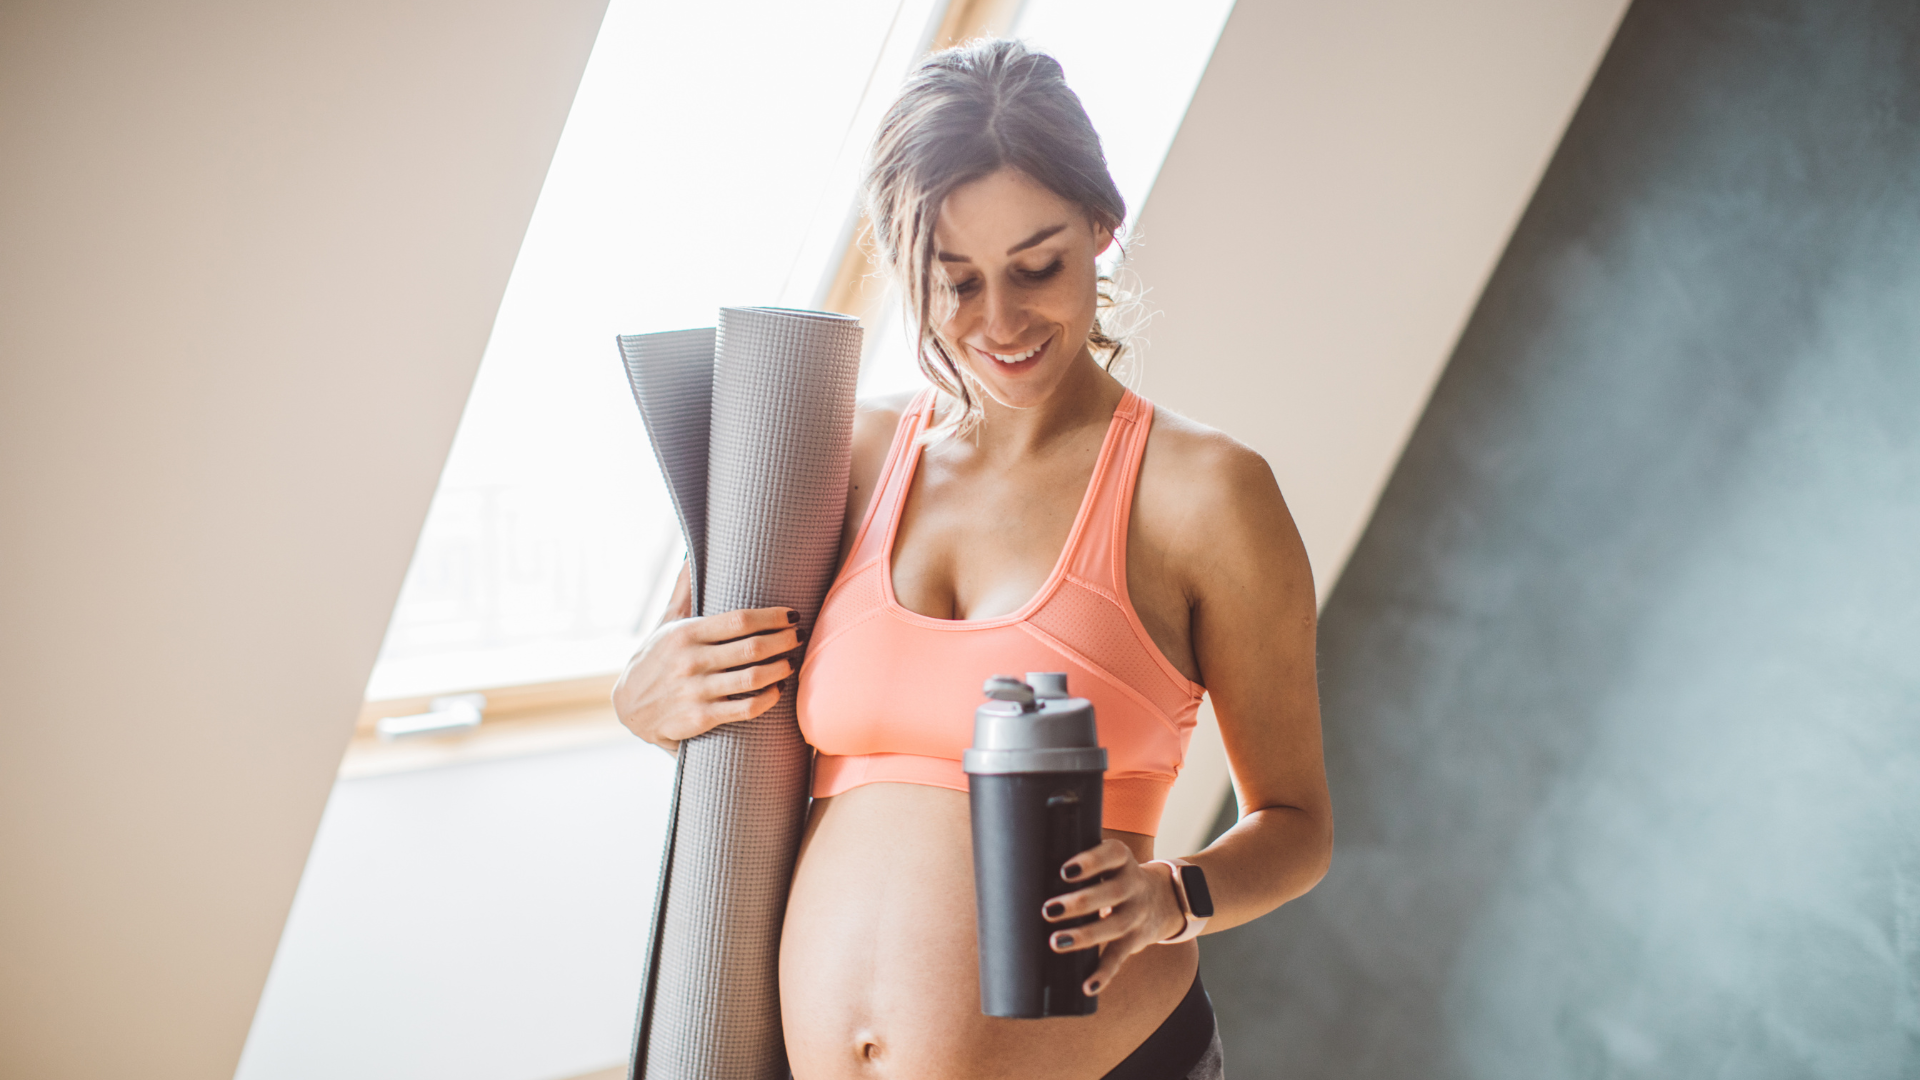 A pregnant lady is wearing a fitness outfit and getting ready to do some yoga.